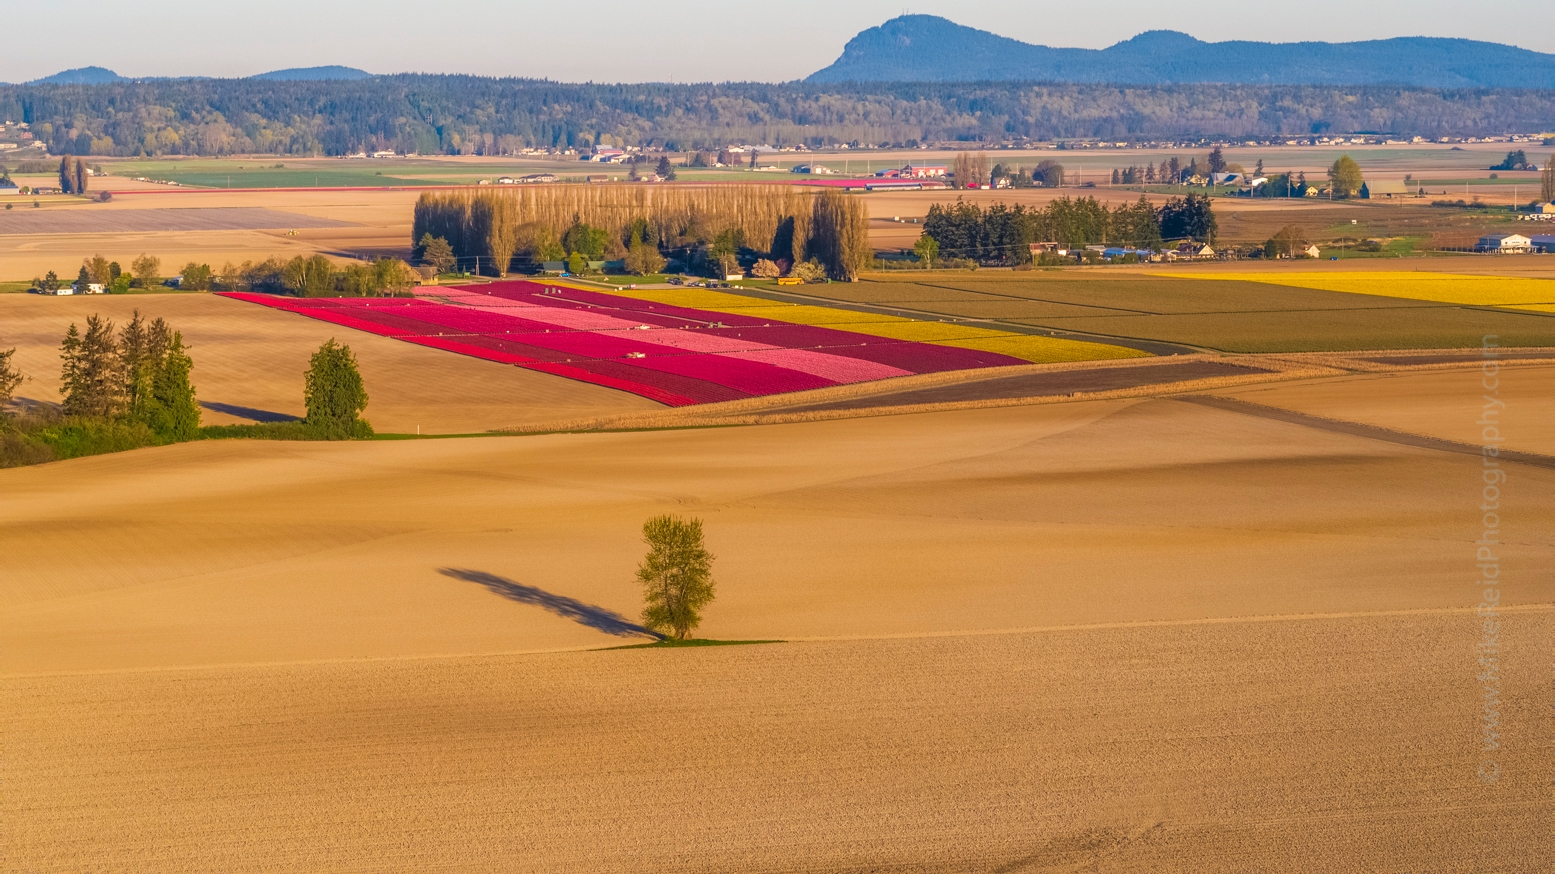 Over the Skagit Valley Solitary Tree and Tulip Fields